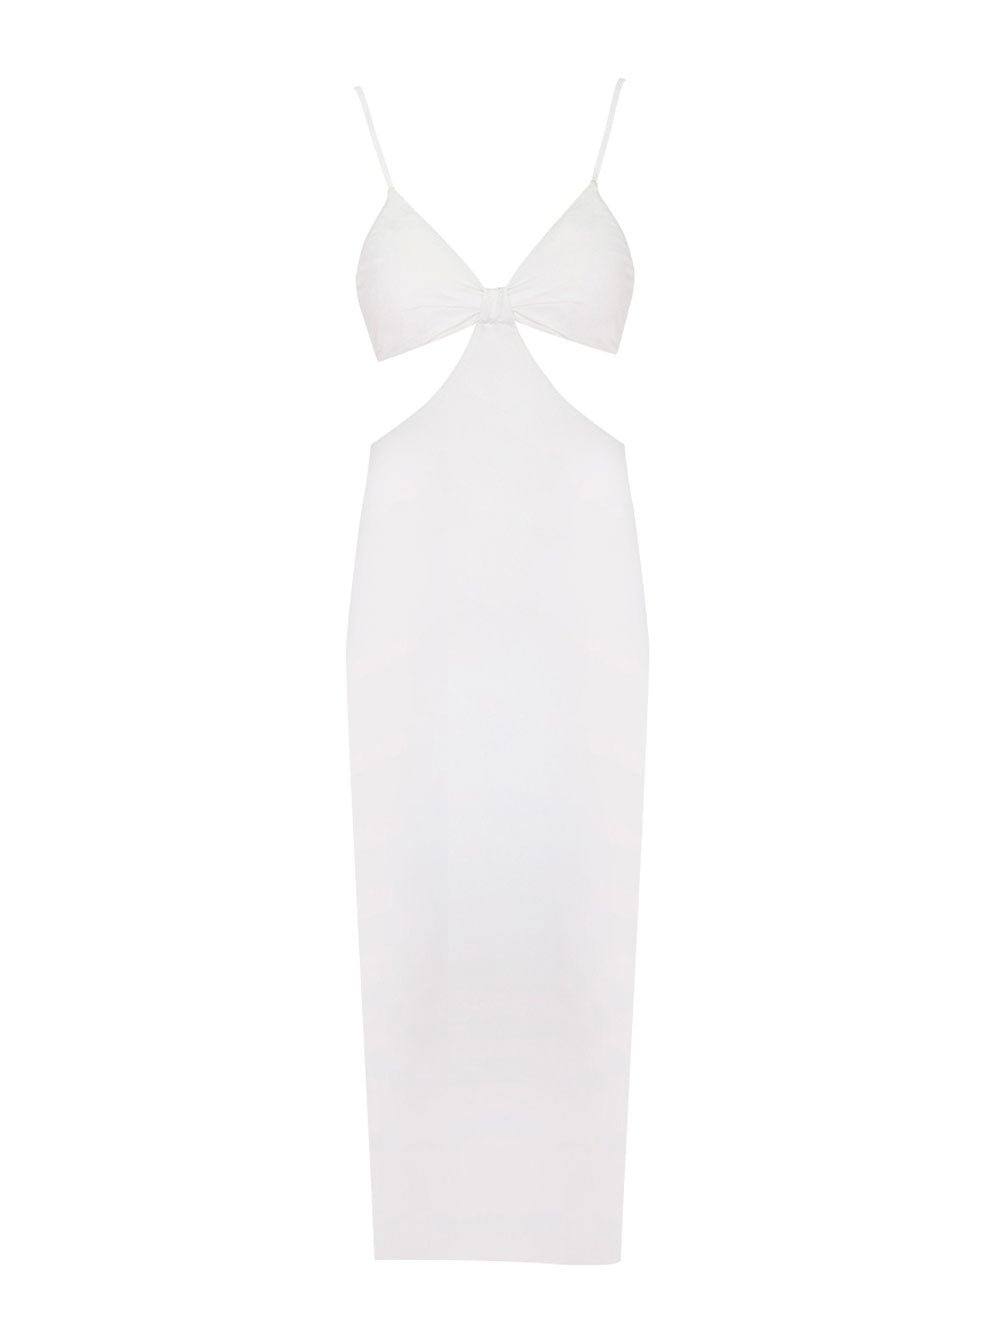 Adjustable Cut Out Maxi Dress - White - OCEAN MYSTERY